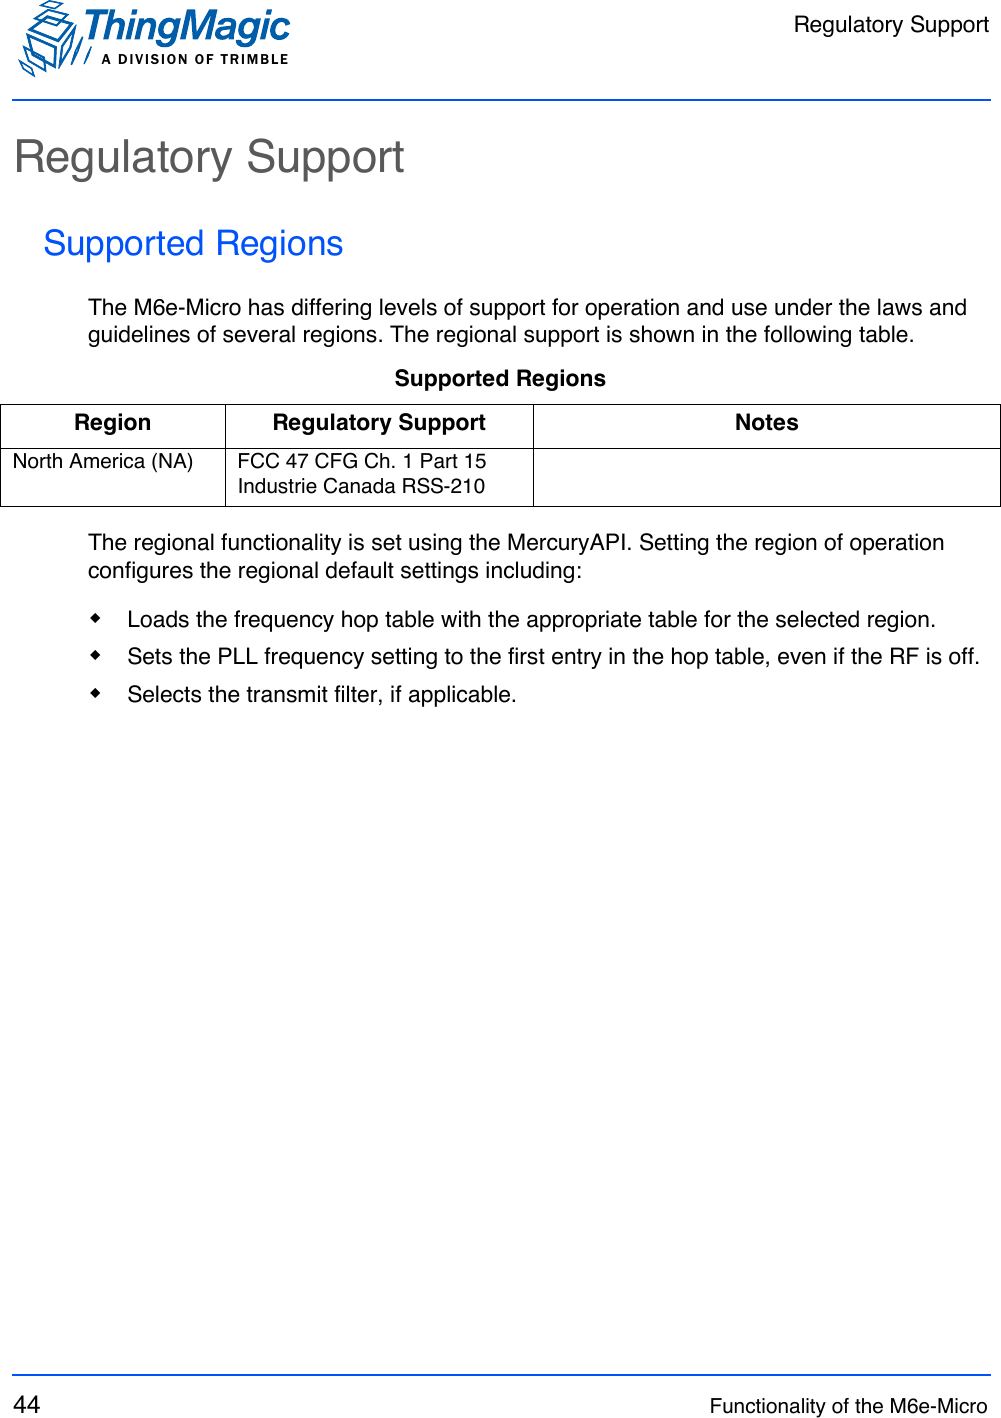 Regulatory SupportA DIVISION OF TRIMBLE44 Functionality of the M6e-MicroRegulatory SupportSupported RegionsThe M6e-Micro has differing levels of support for operation and use under the laws and guidelines of several regions. The regional support is shown in the following table.The regional functionality is set using the MercuryAPI. Setting the region of operation configures the regional default settings including:Loads the frequency hop table with the appropriate table for the selected region.Sets the PLL frequency setting to the first entry in the hop table, even if the RF is off.Selects the transmit filter, if applicable.Supported RegionsRegion Regulatory Support NotesNorth America (NA) FCC 47 CFG Ch. 1 Part 15Industrie Canada RSS-210